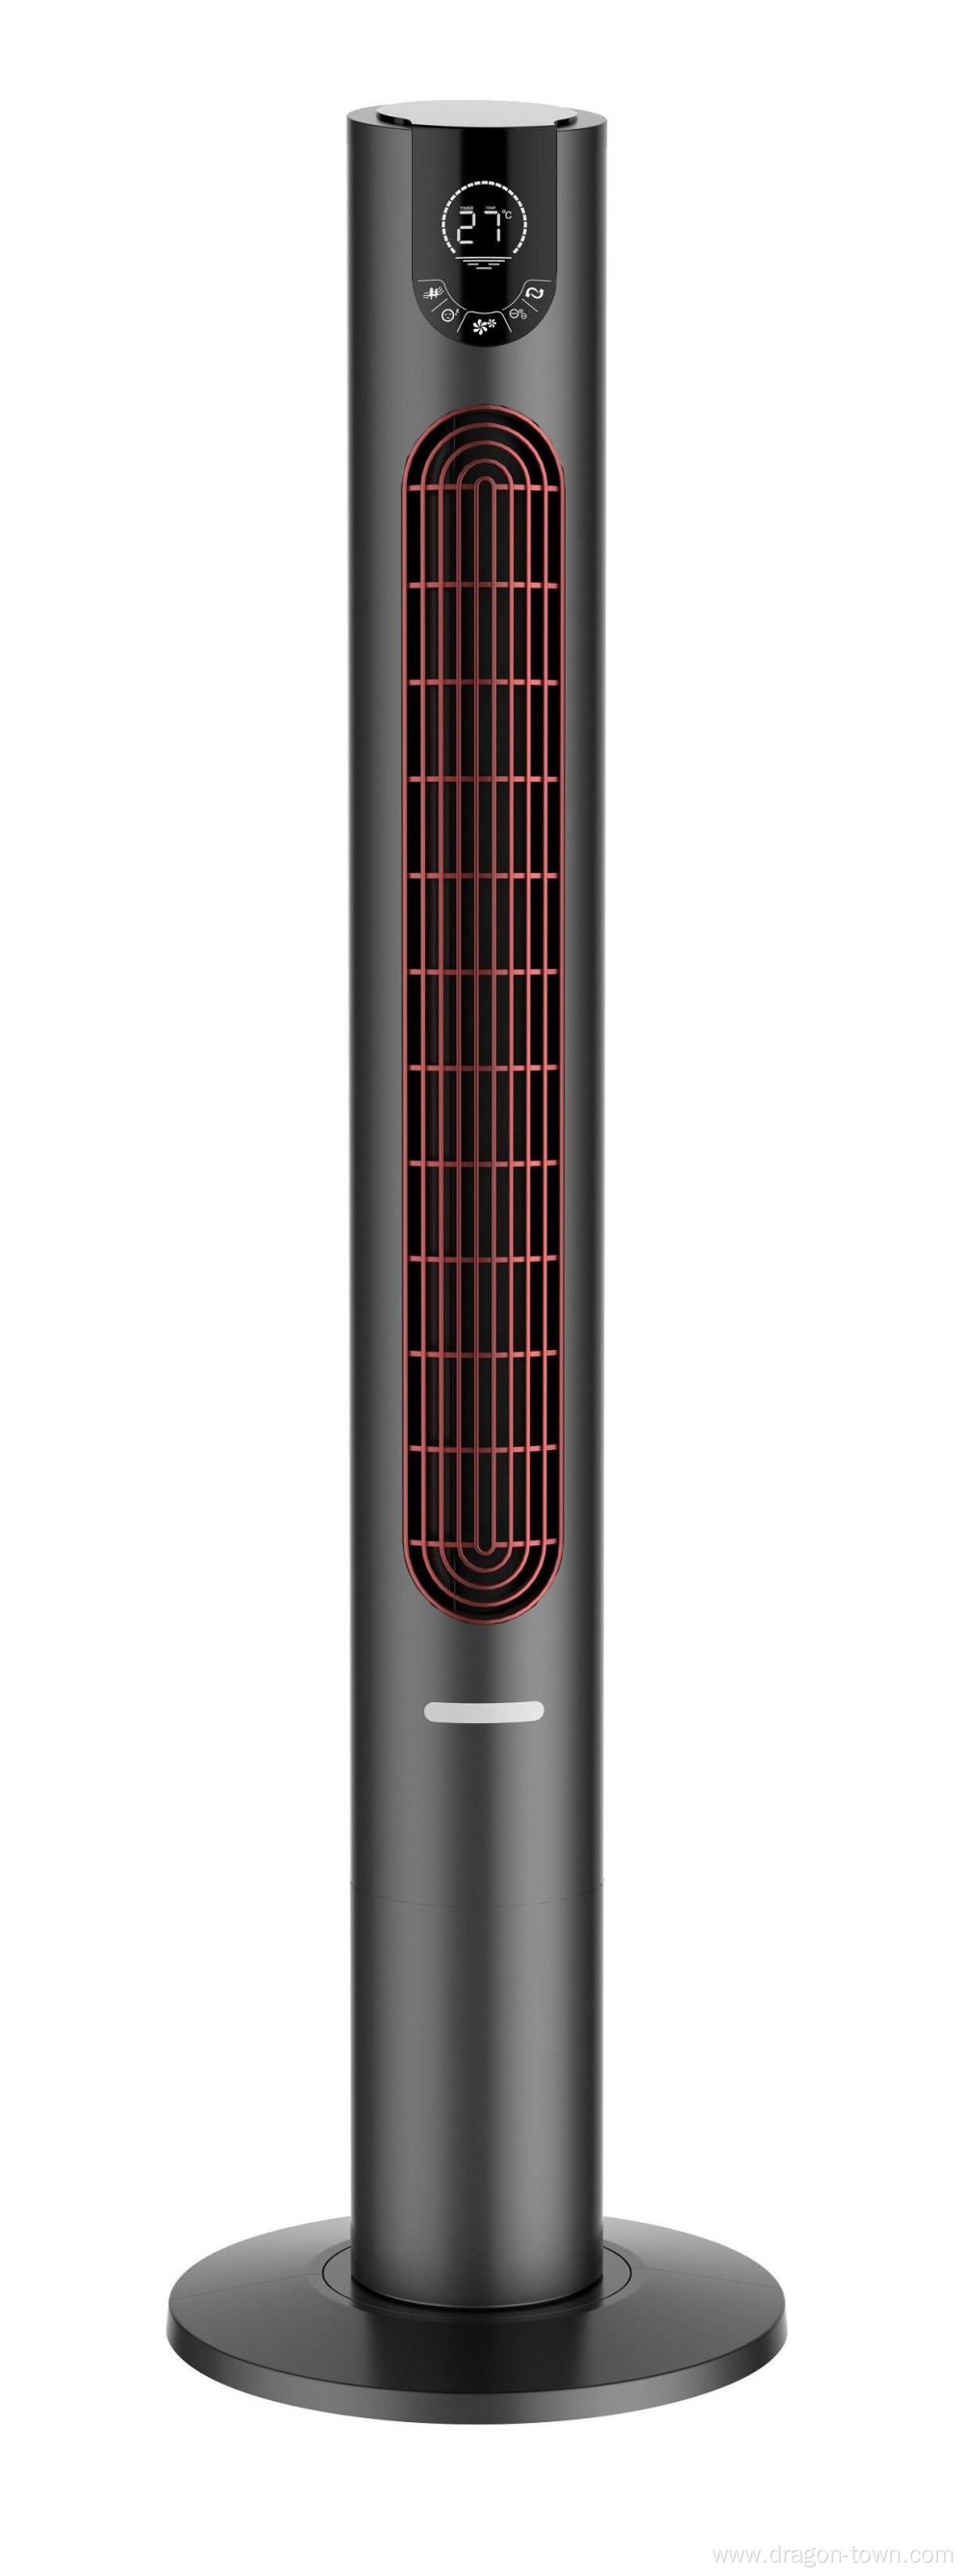 45inch High Quality Tower Fan